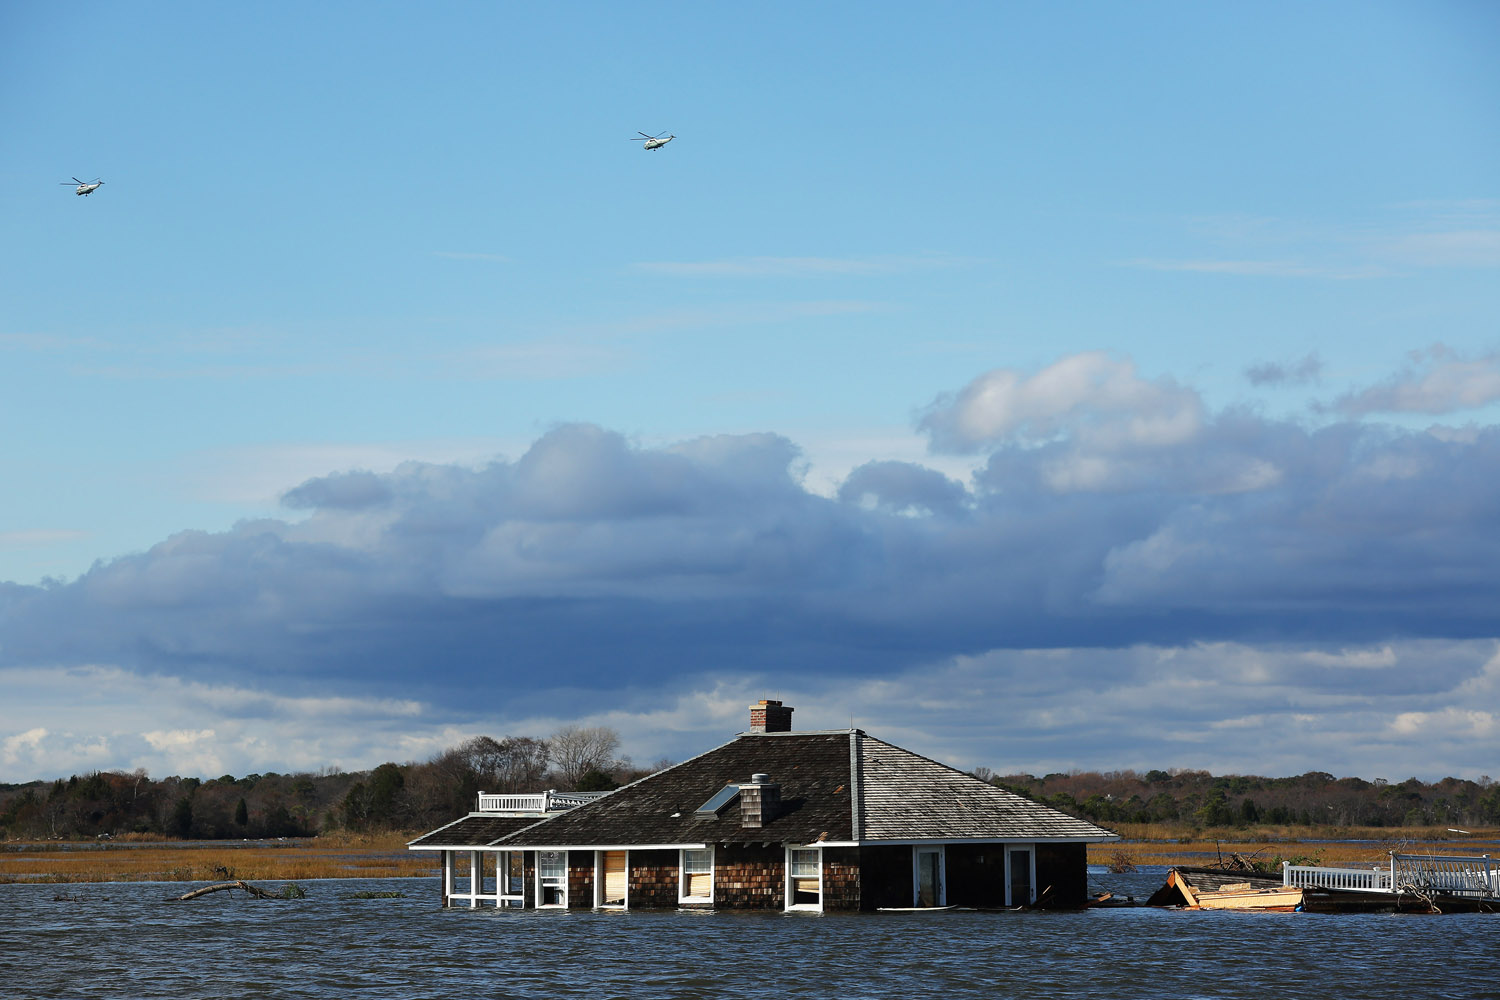 Image: Oct. 31, 2012. Two helicopters fly over a house that was washed from Mantoloking into the adjacent lake some 500 yards from the closest row of houses. Mantoloking, N.J.